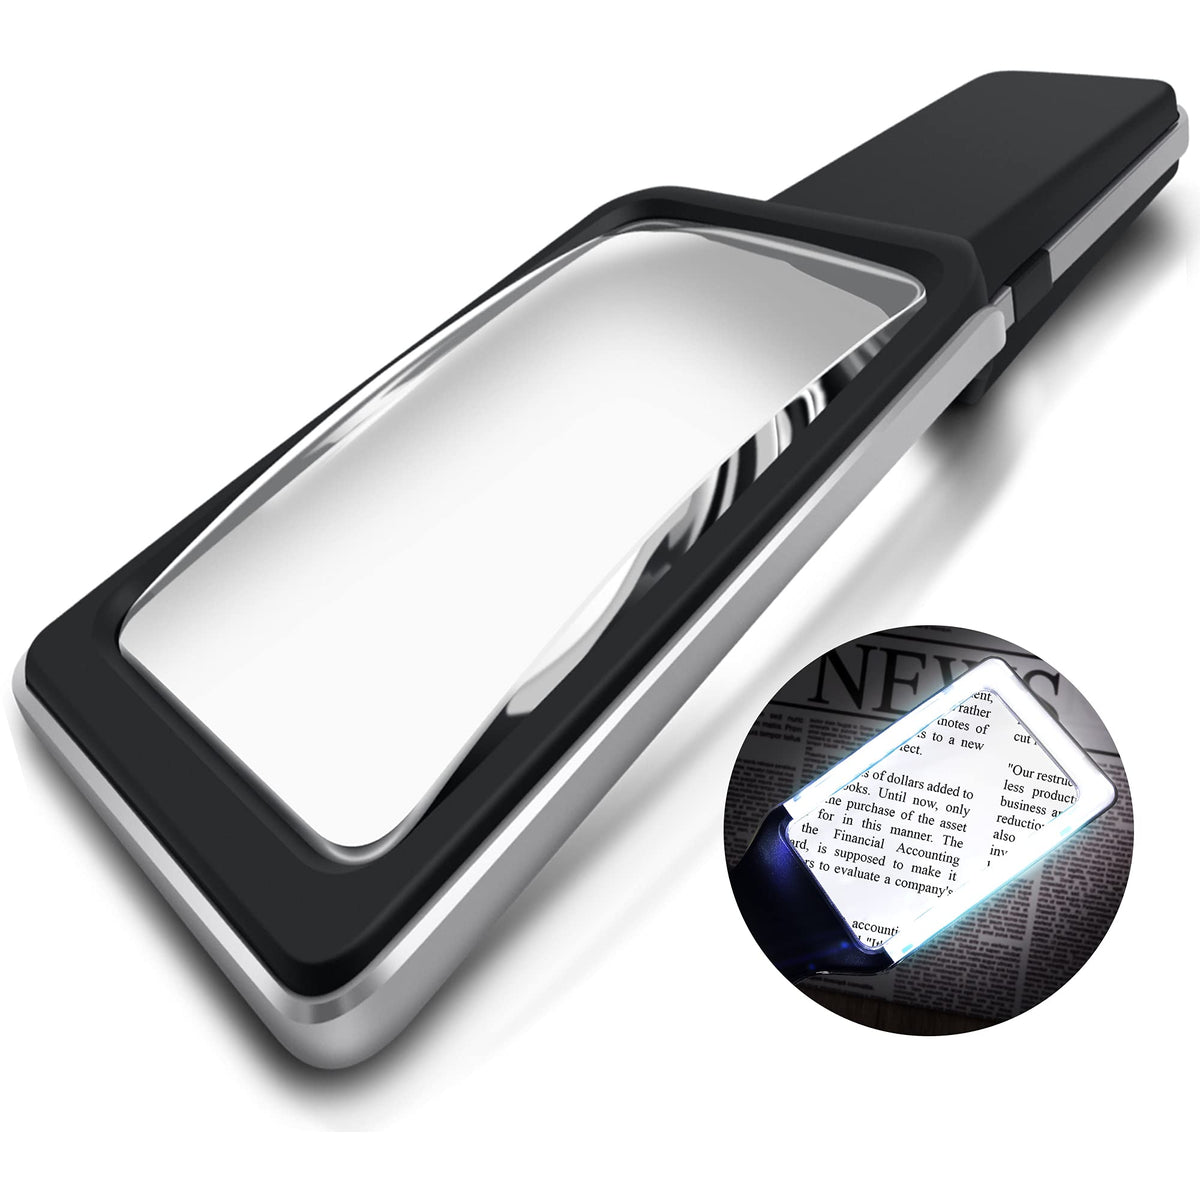 MAGNIPROS 6X Large Magnifying Glass with [Anti-Glare & Fully Dimmable LEDs]-Evenly Lit Viewing Area-Lighted Magnifier for Reading Small Fonts, Low Vision Seniors, Macular Degeneration, Inspection